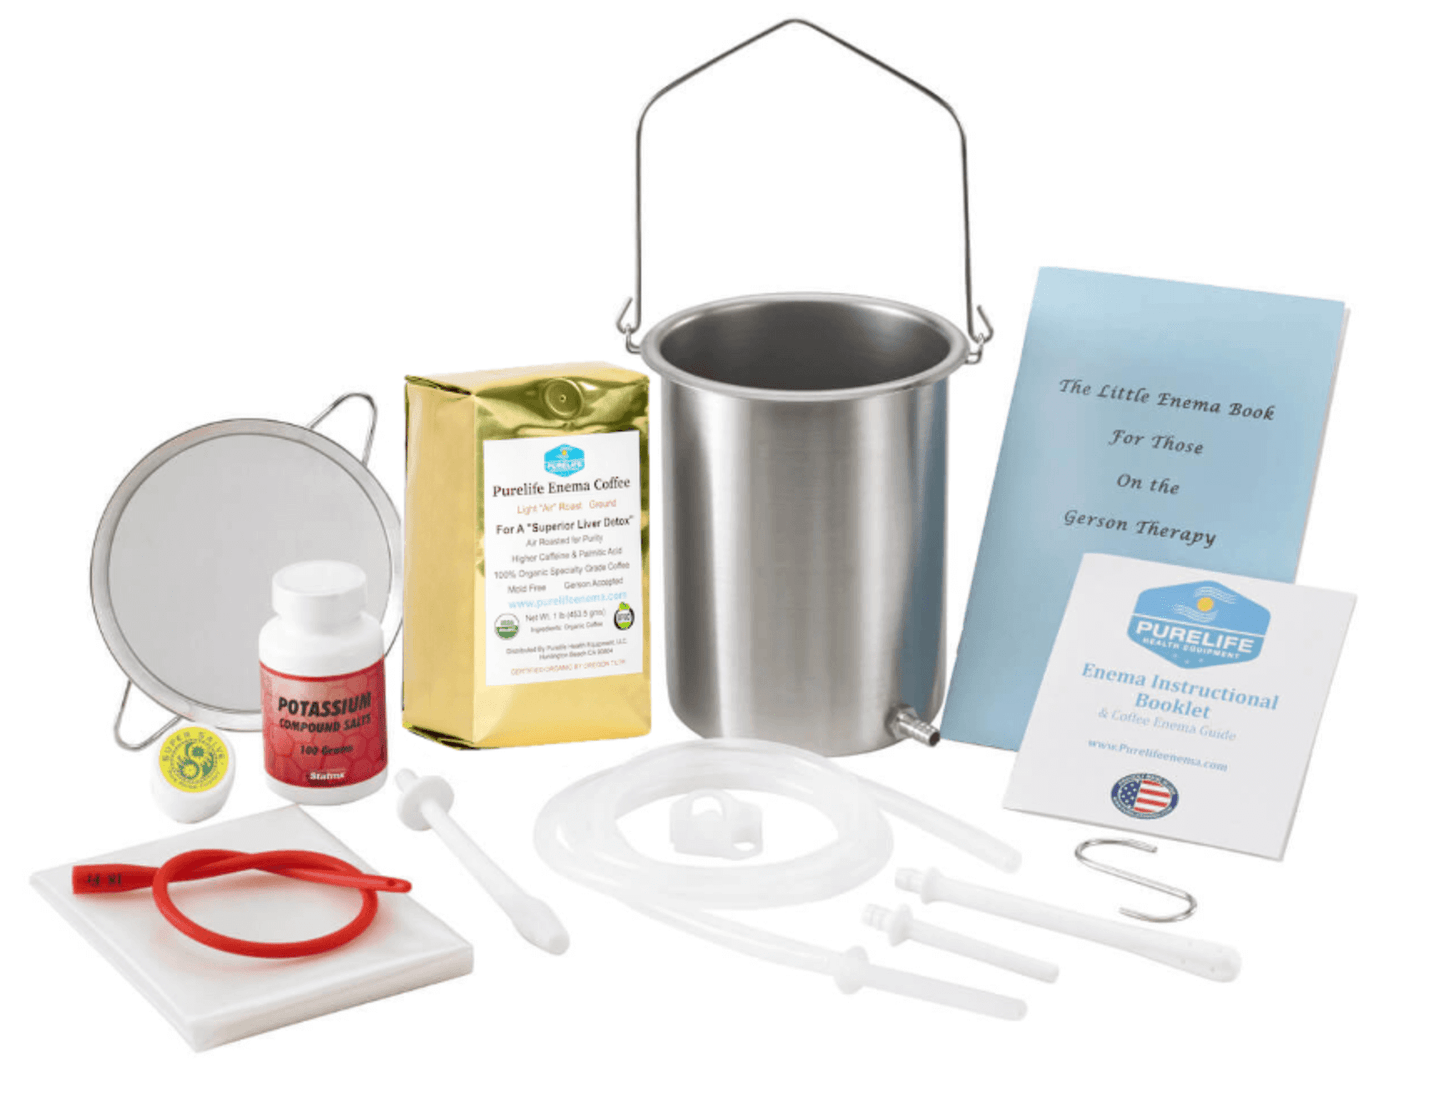 Dream Coffee Enema Kit for Gerson Therapy